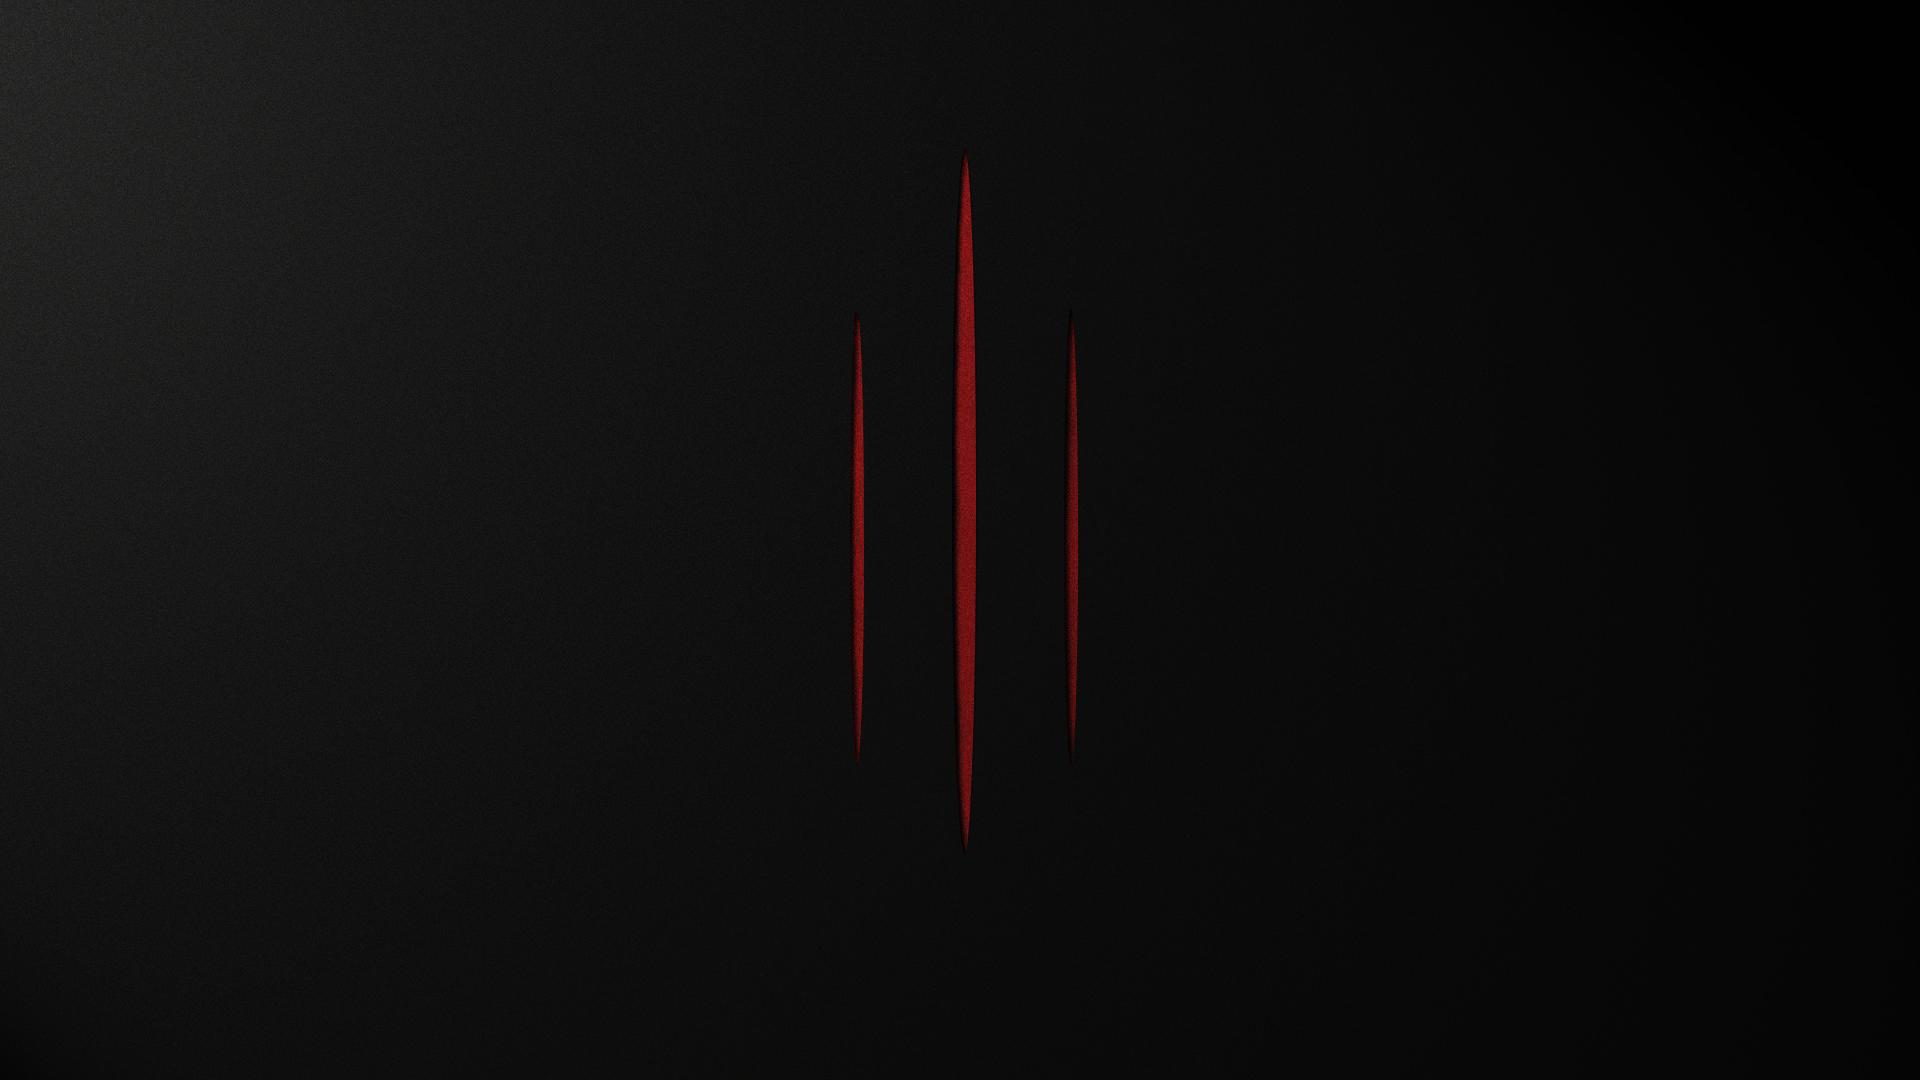 youtube channel art backgrounds 2560x1440